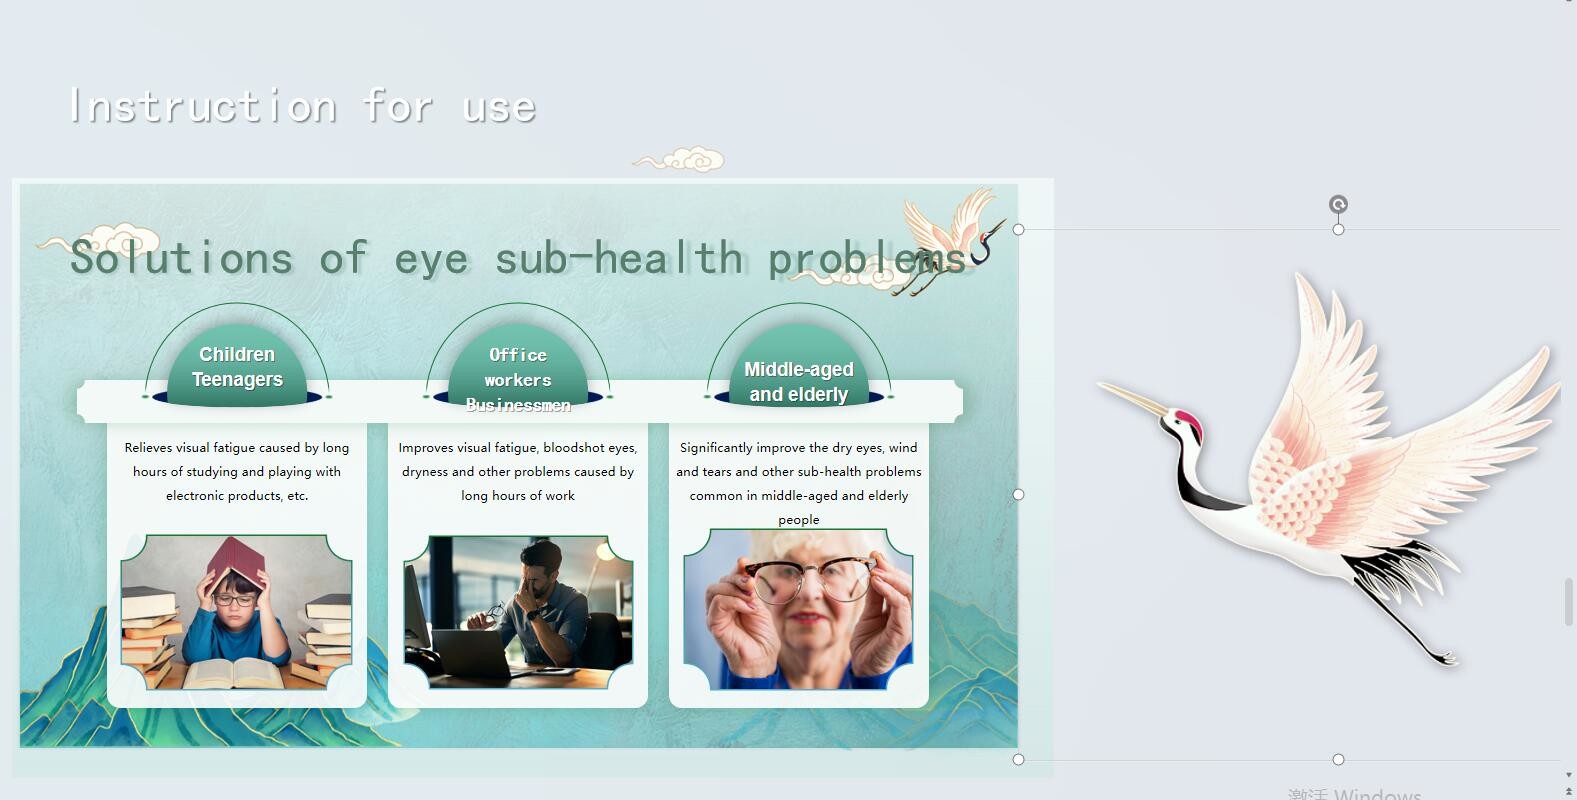 Kangtong Eye Massage and Care Cream Improves Visual fatigue,bloodshot eyes, dryness and other problems caused by long ho